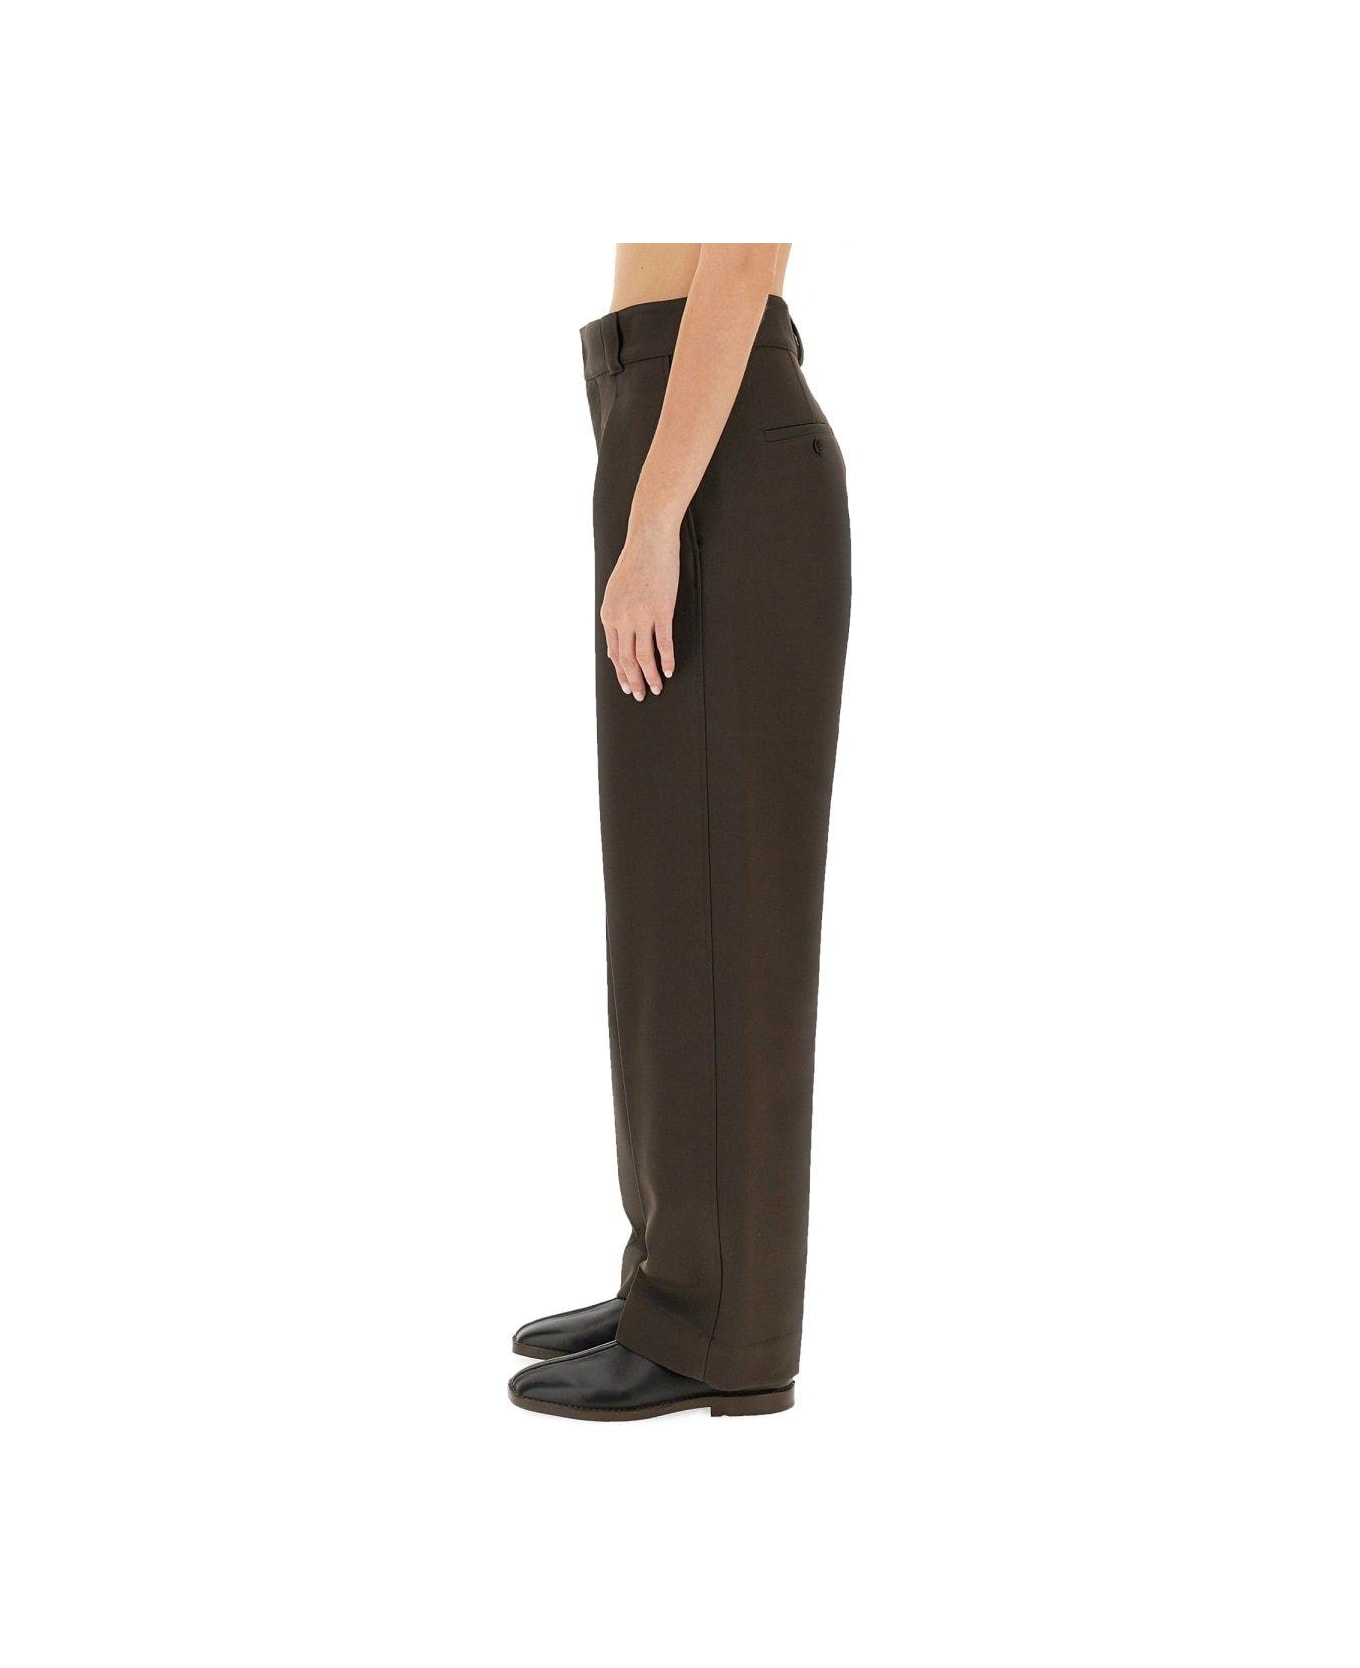 Lemaire Tailored Straight Leg Trousers - BROWN ボトムス